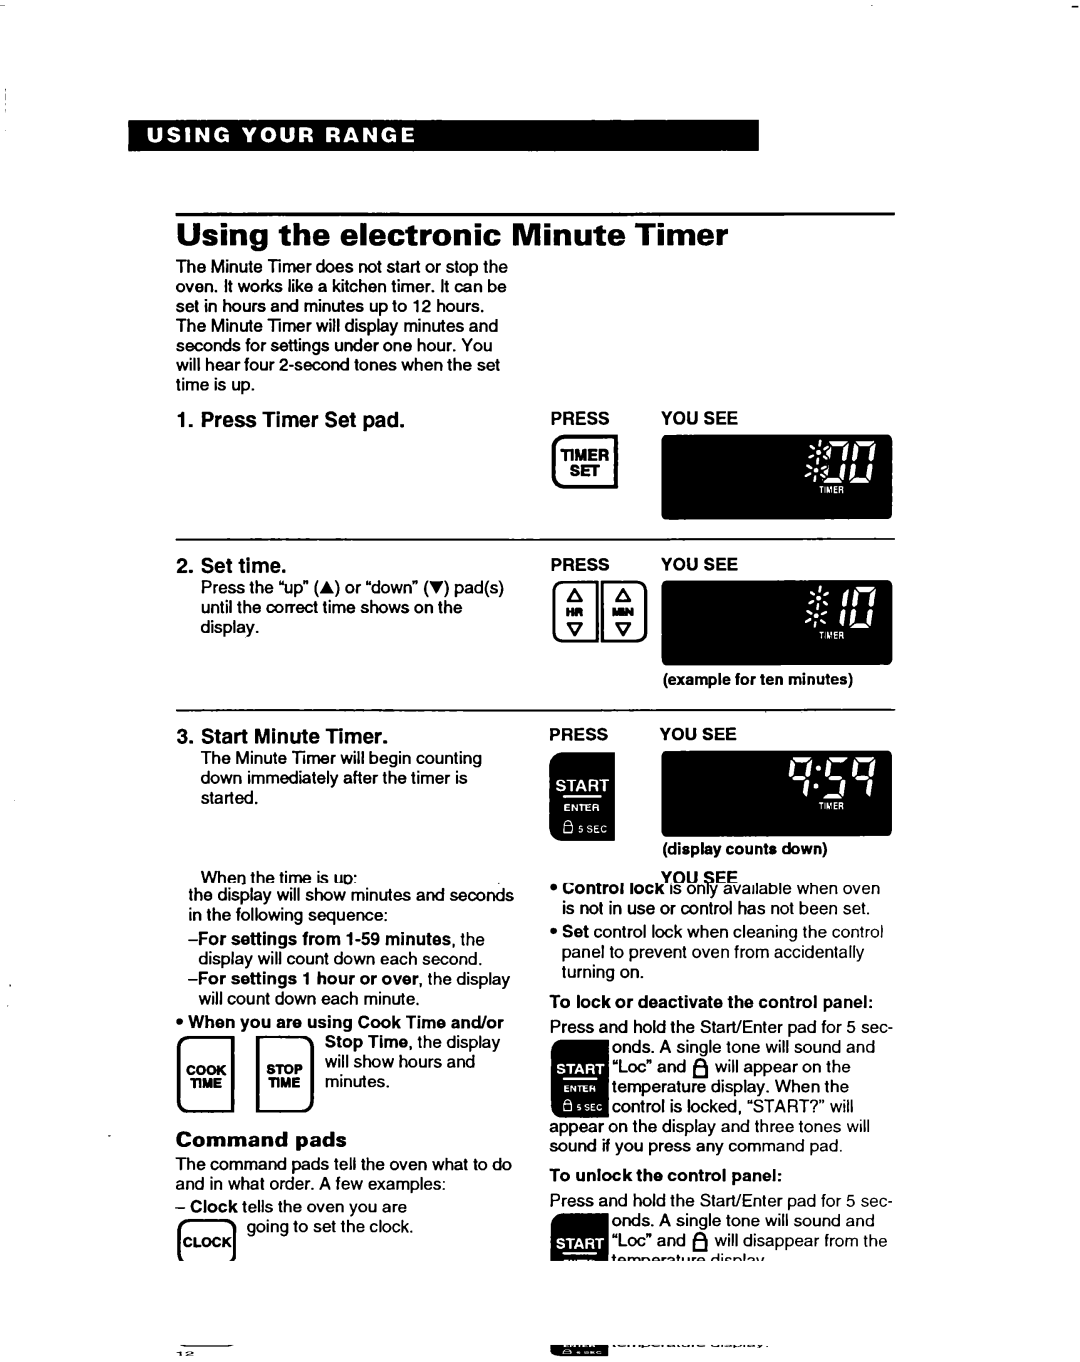 Whirlpool RF385PXD Using the electronic Minute Timer, Press Timer Set pad, Start Minute Timer, Turn off Minute Timer 